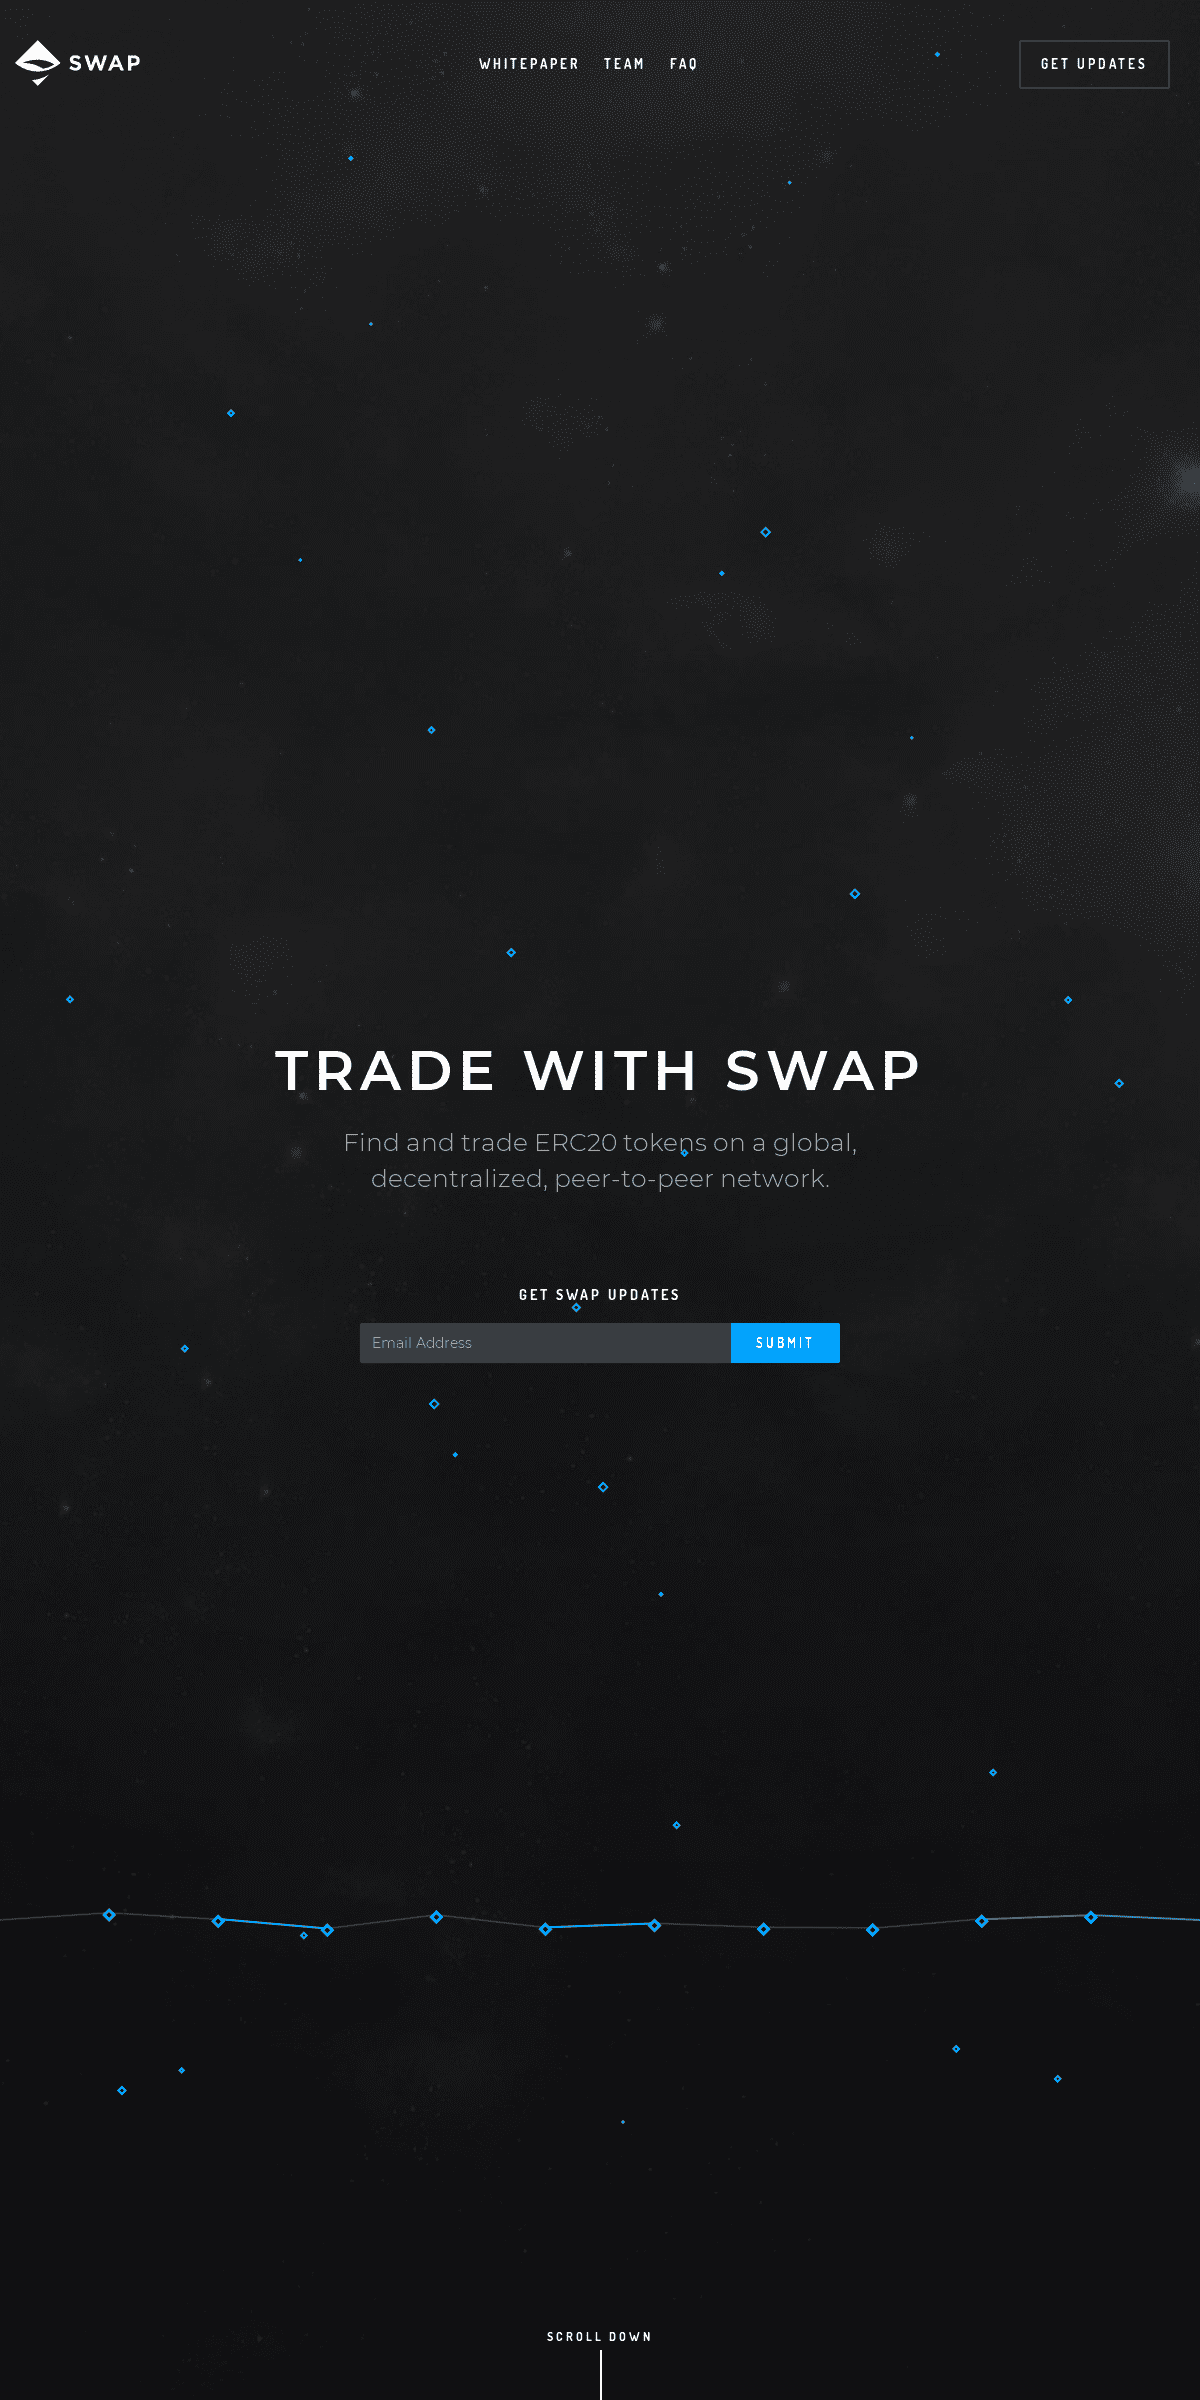 A complete backup of swap.tech